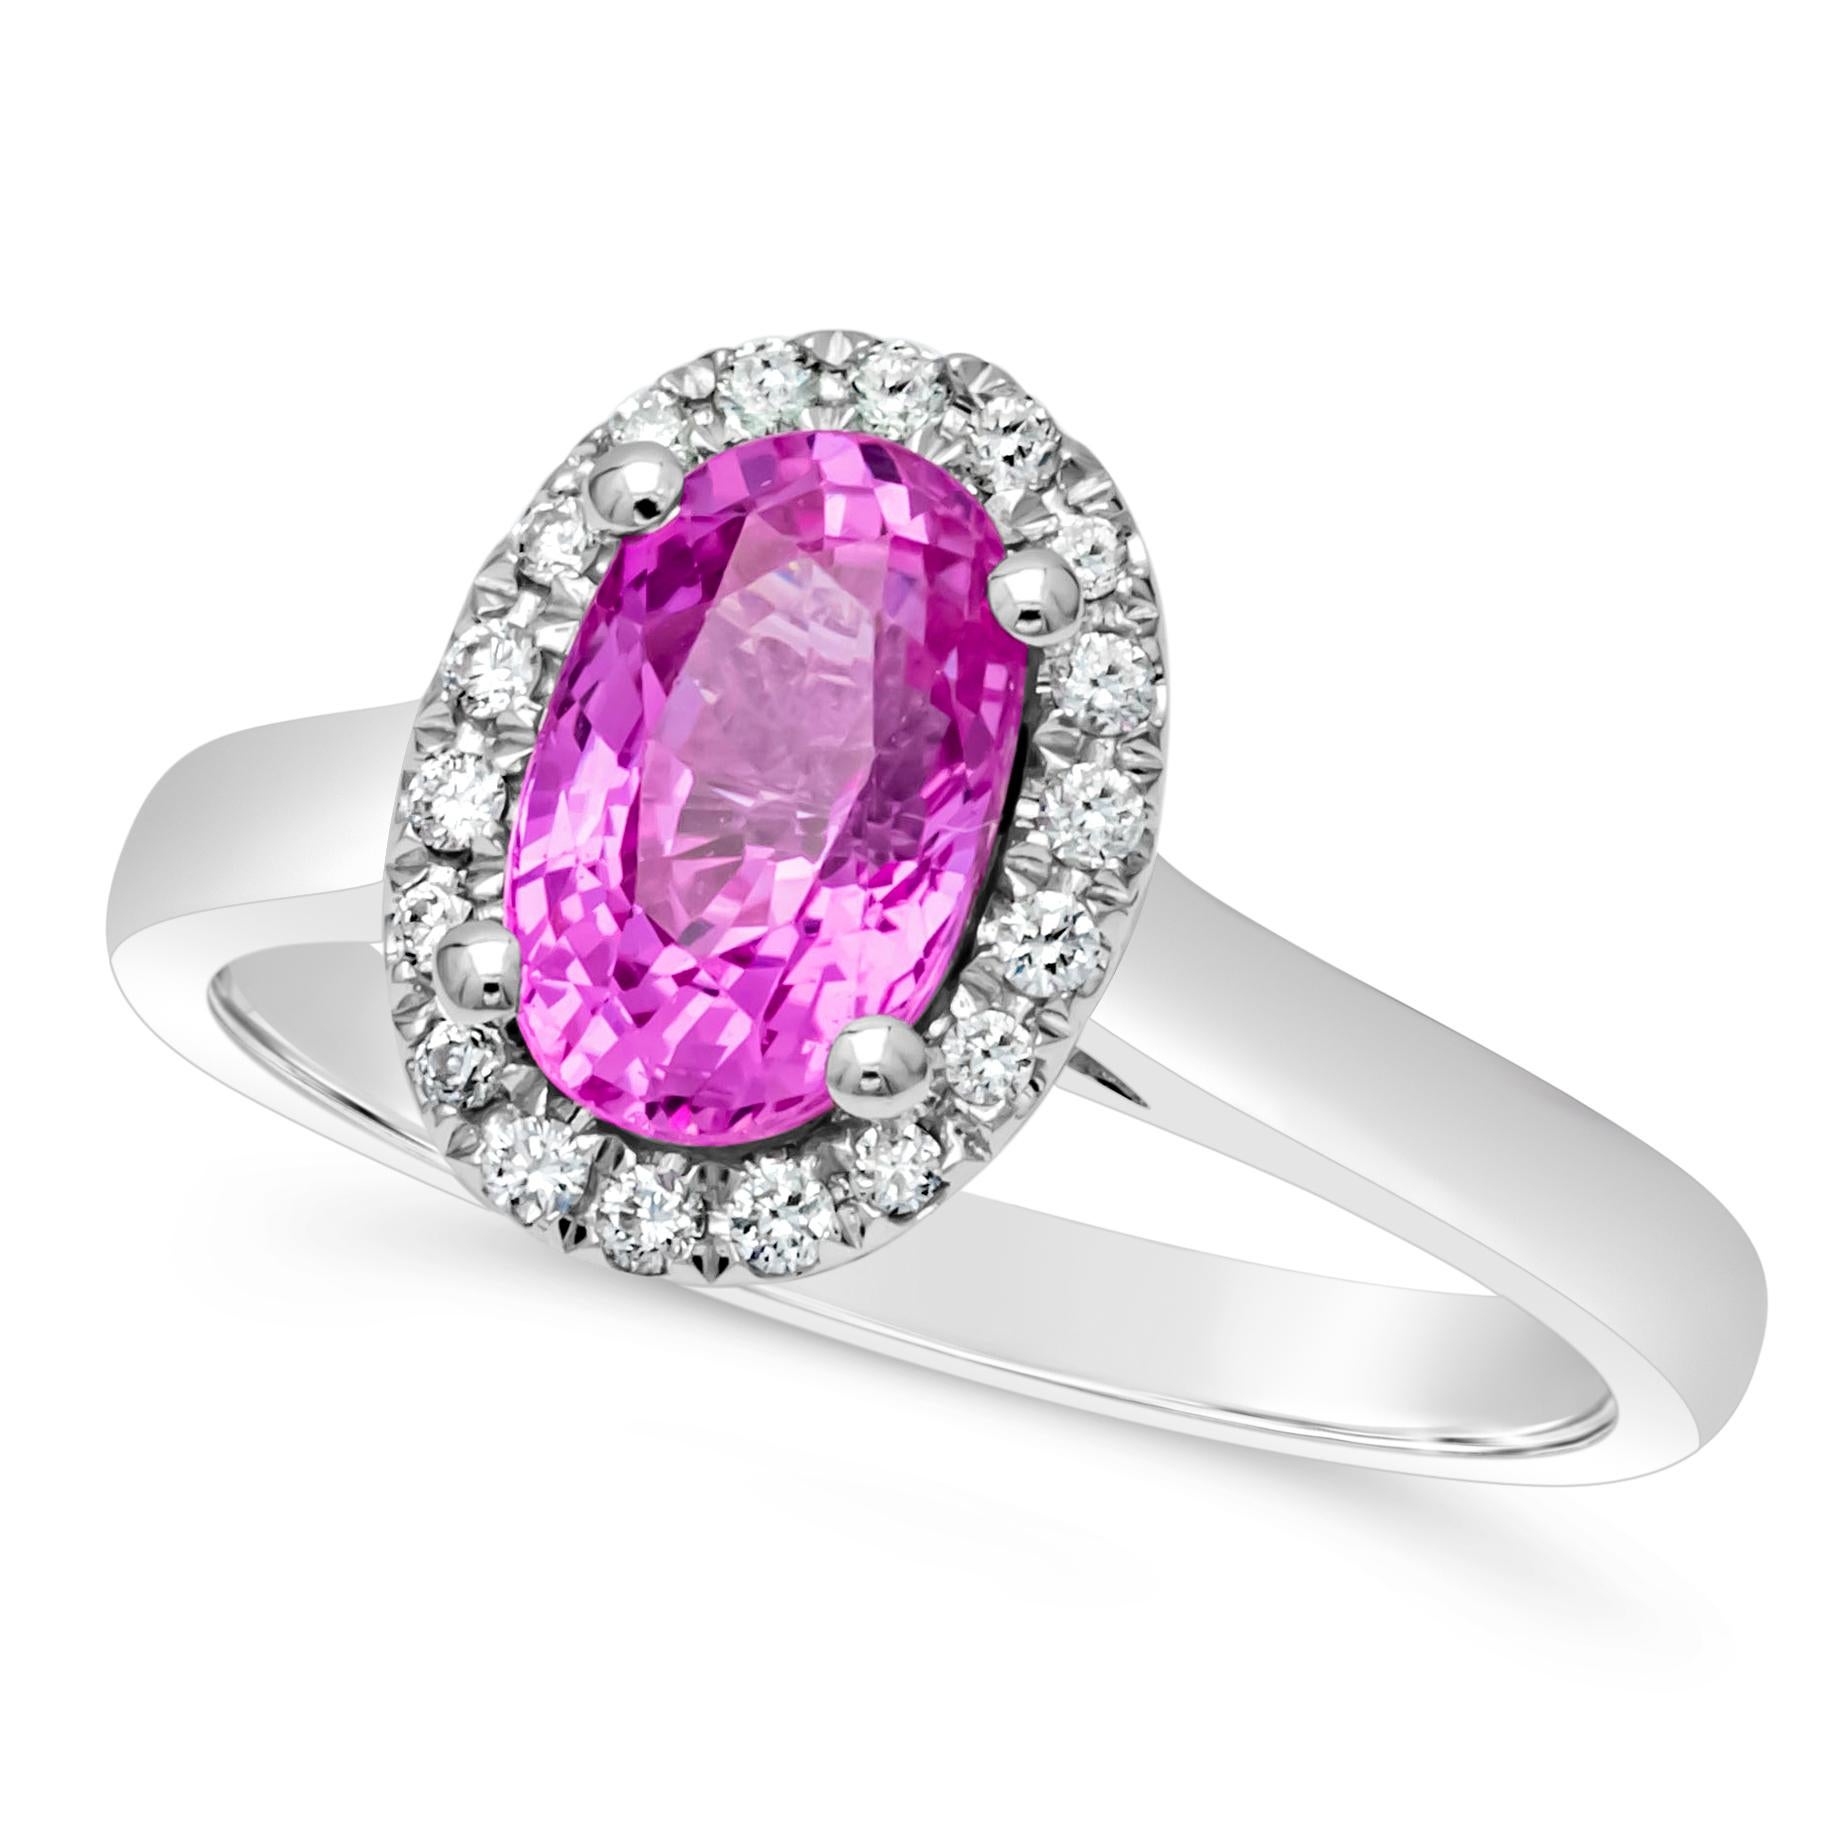 Contemporary Roman Malakov 1.95 Carats Oval Cut Pink Sapphire & Diamond Halo Engagement Ring For Sale